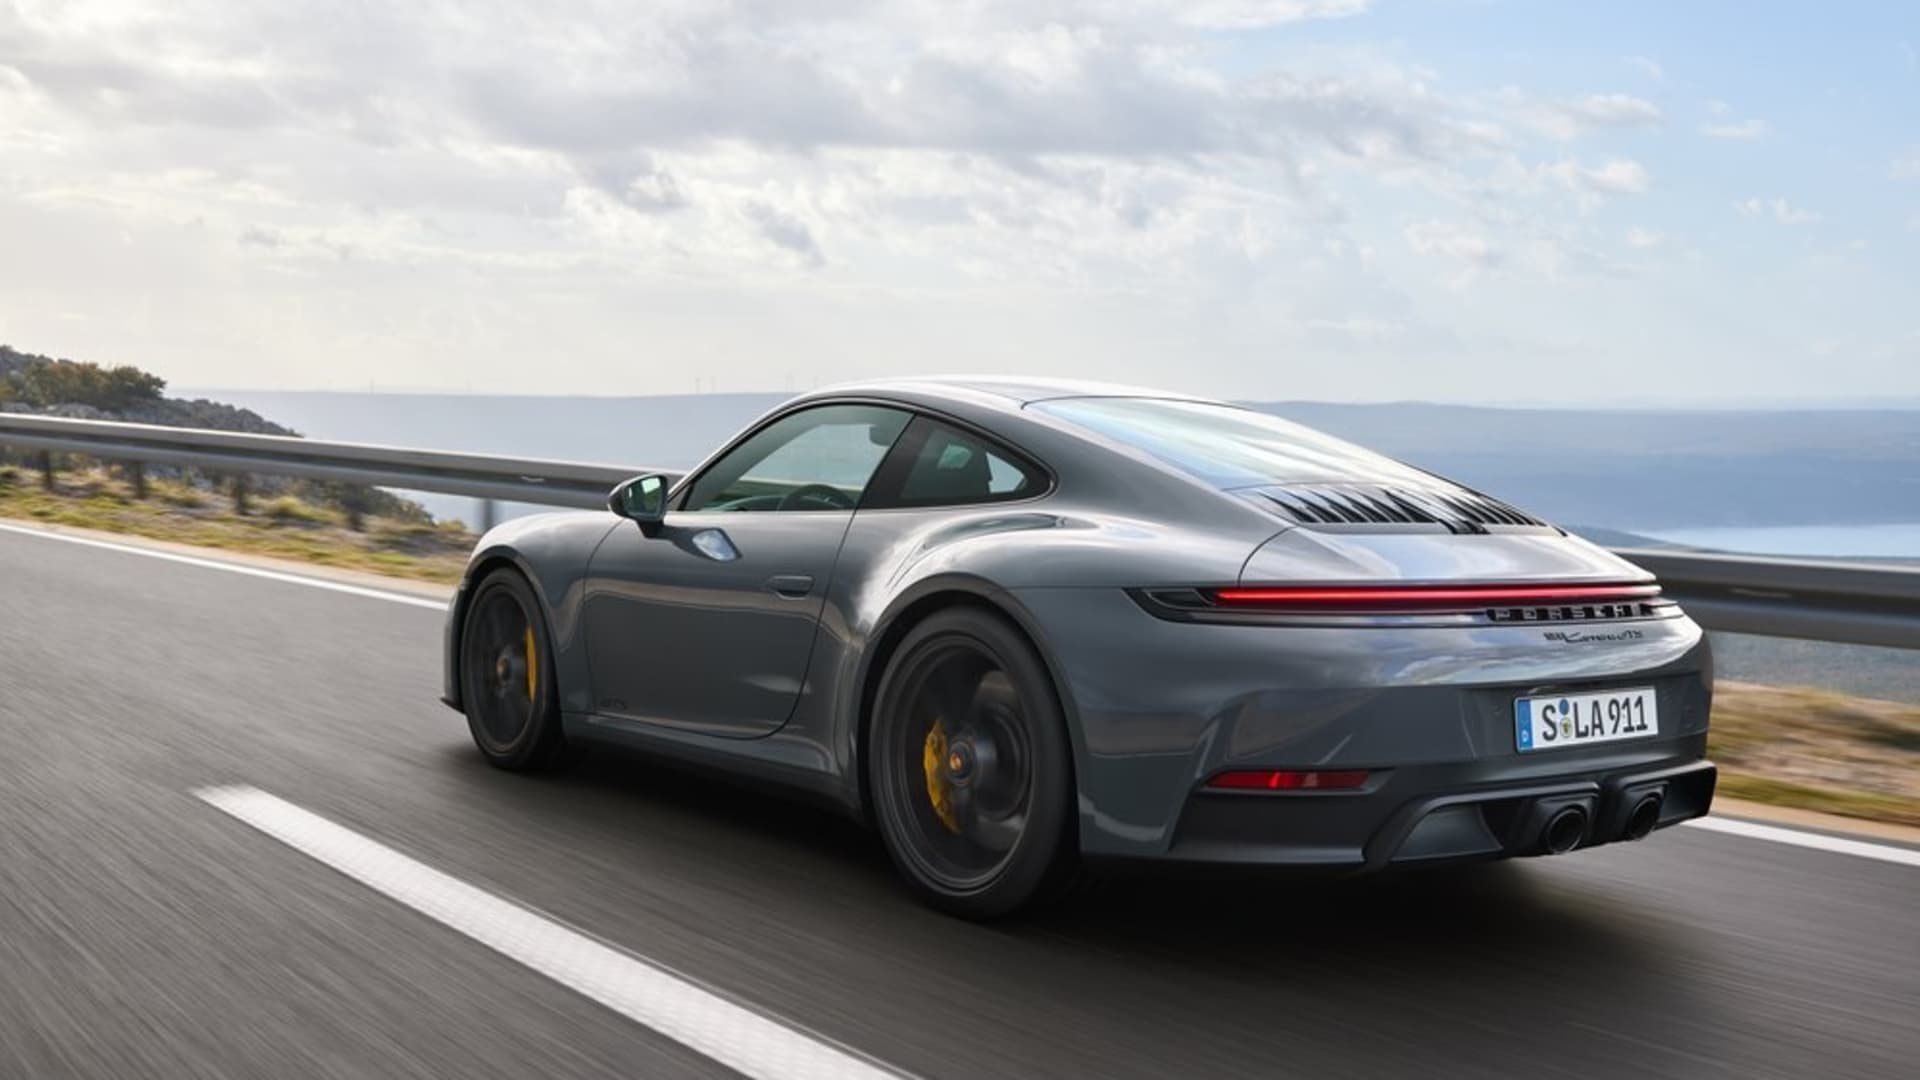 Porsche Launches Its First-Ever 911 Hybrid: What You Need to Know About the Fastest, Greenest Porsche Yet